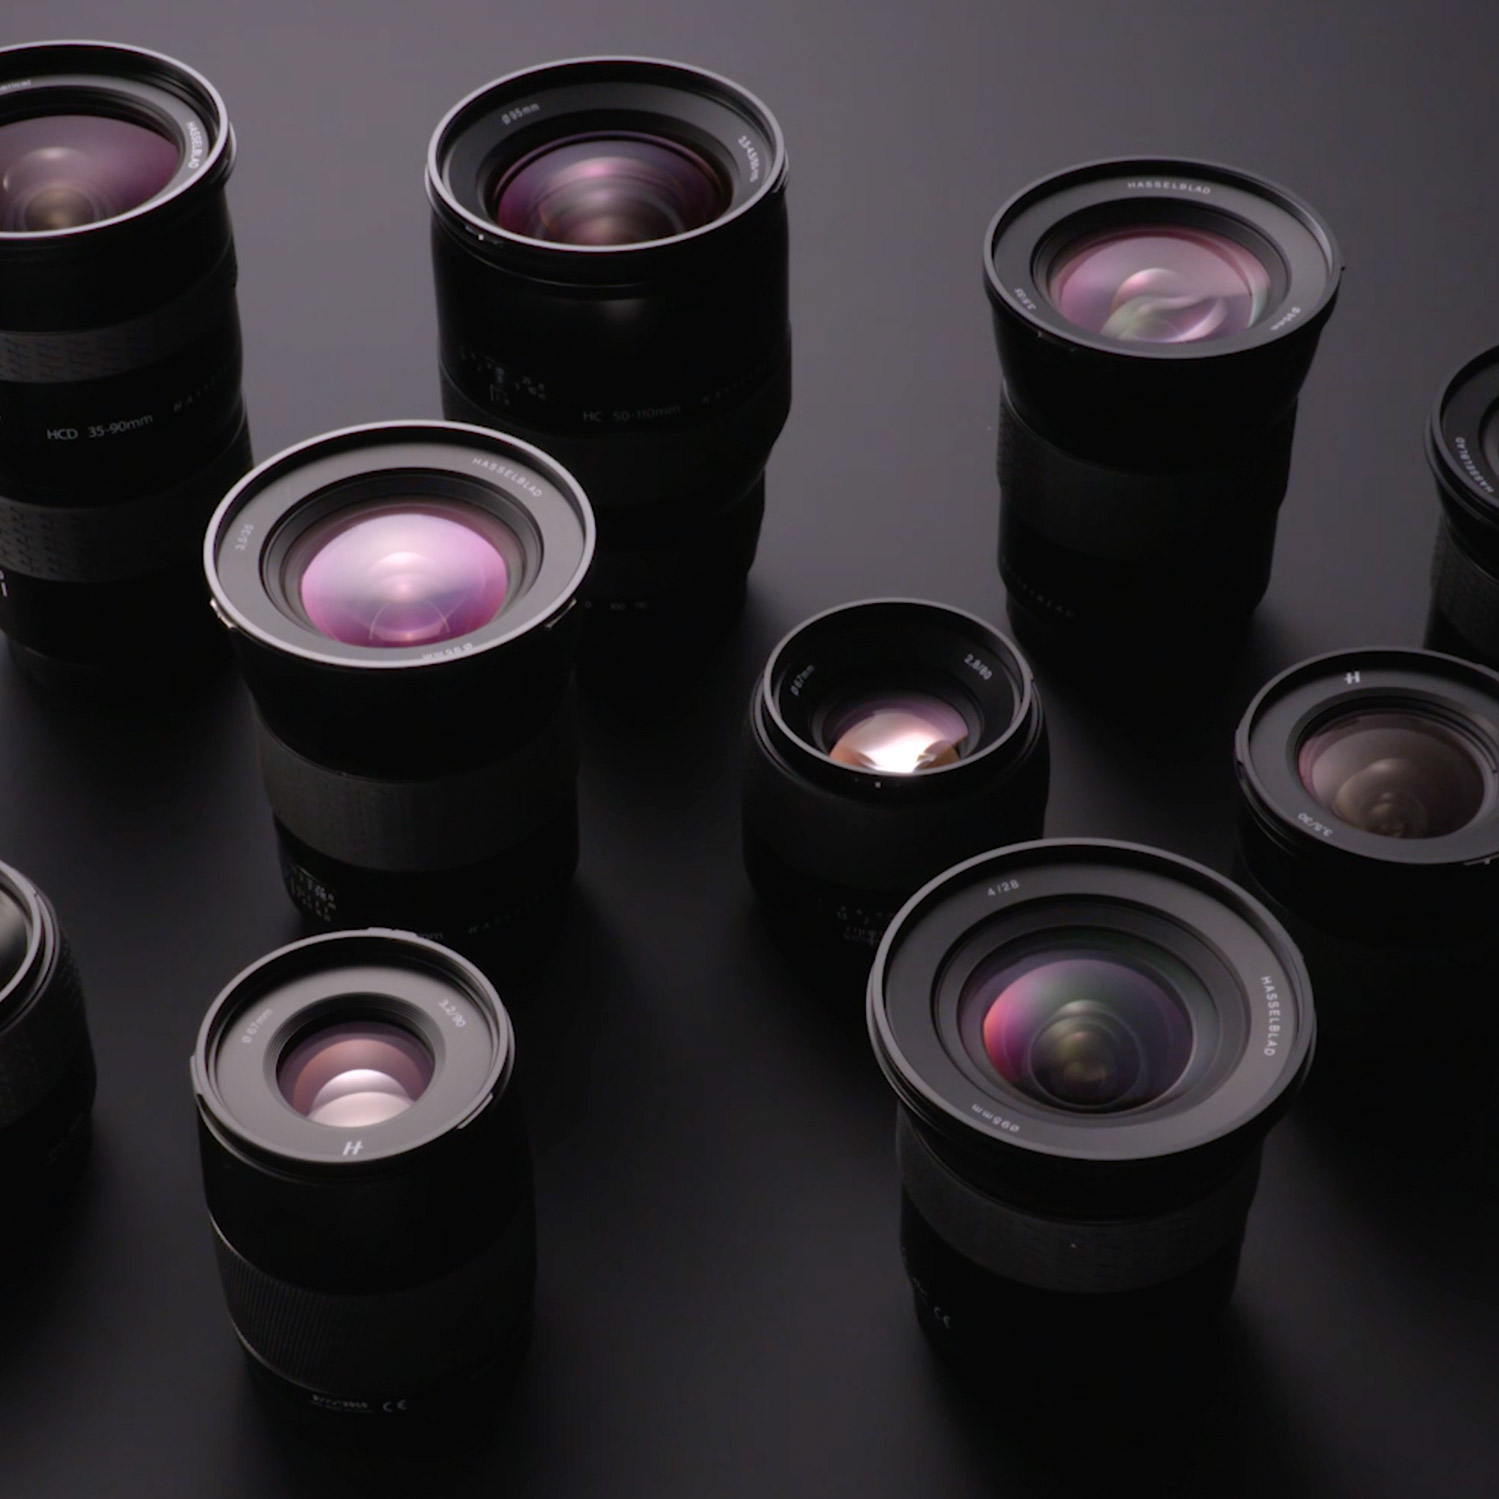 Selection of Hasselblad lenses